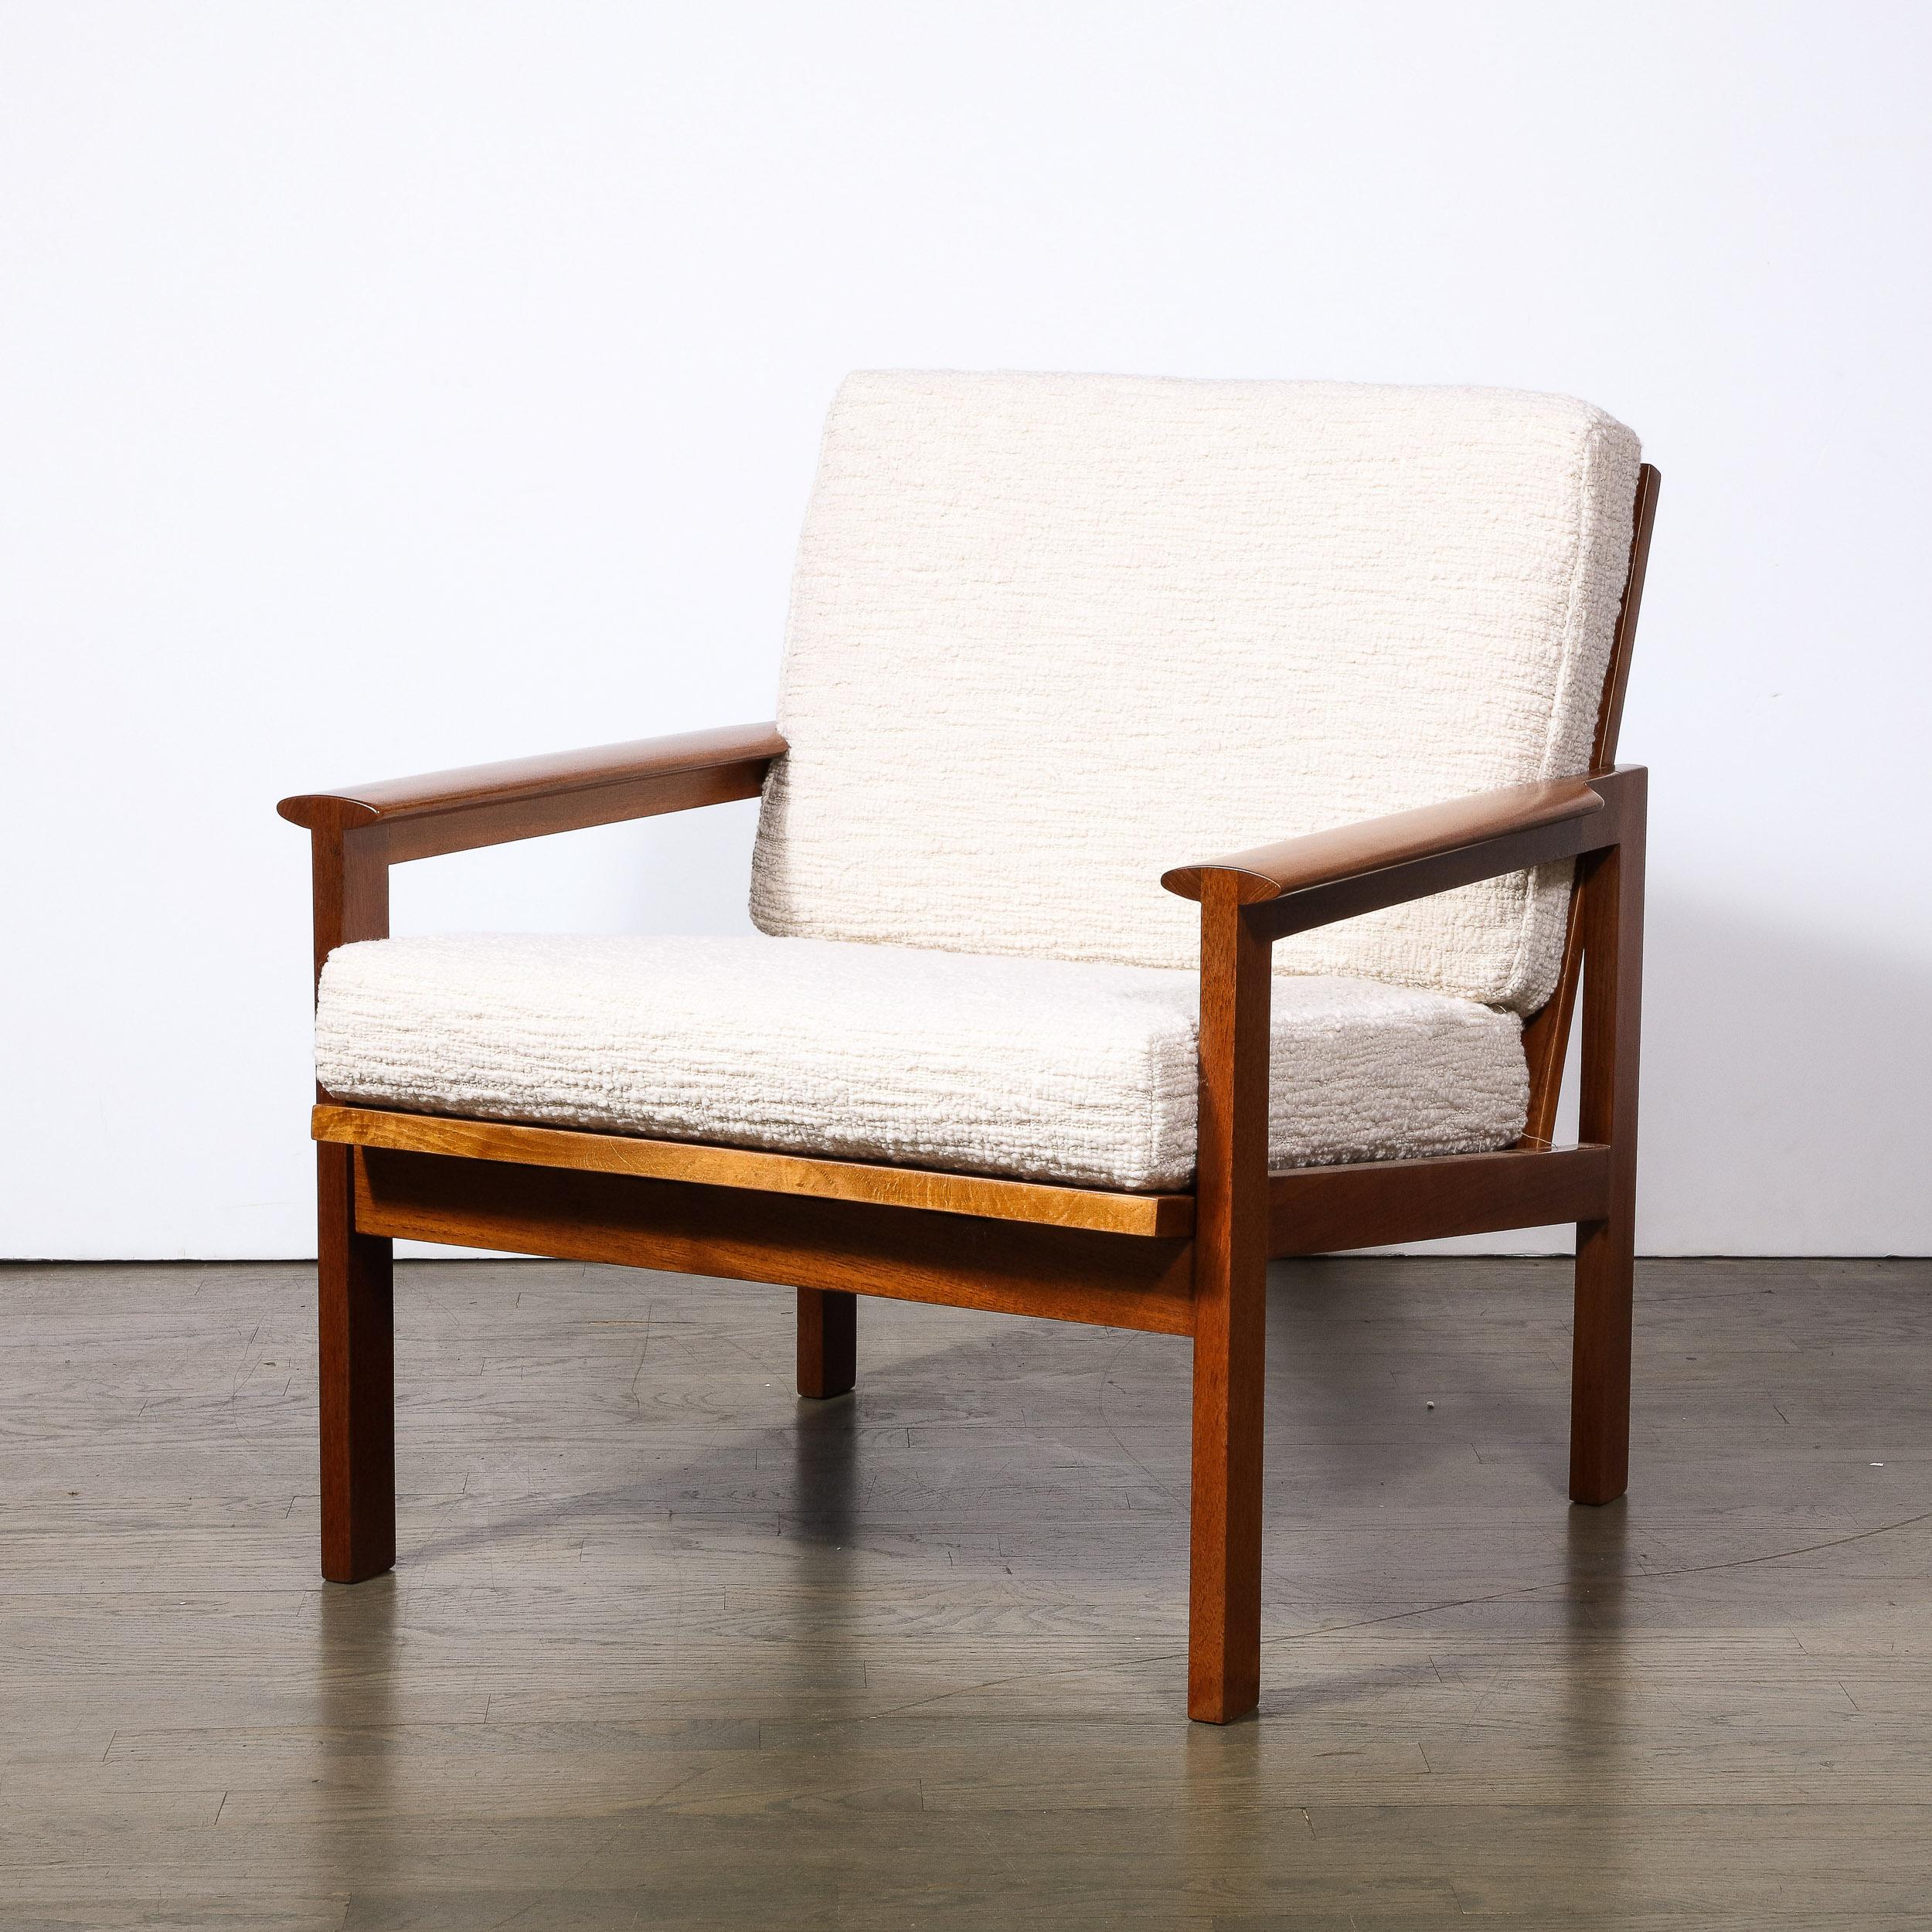 Danish Mid-Century Modern Armchair in Hand Rubbed Teak and Holly Hunt Bouclé Fabric For Sale